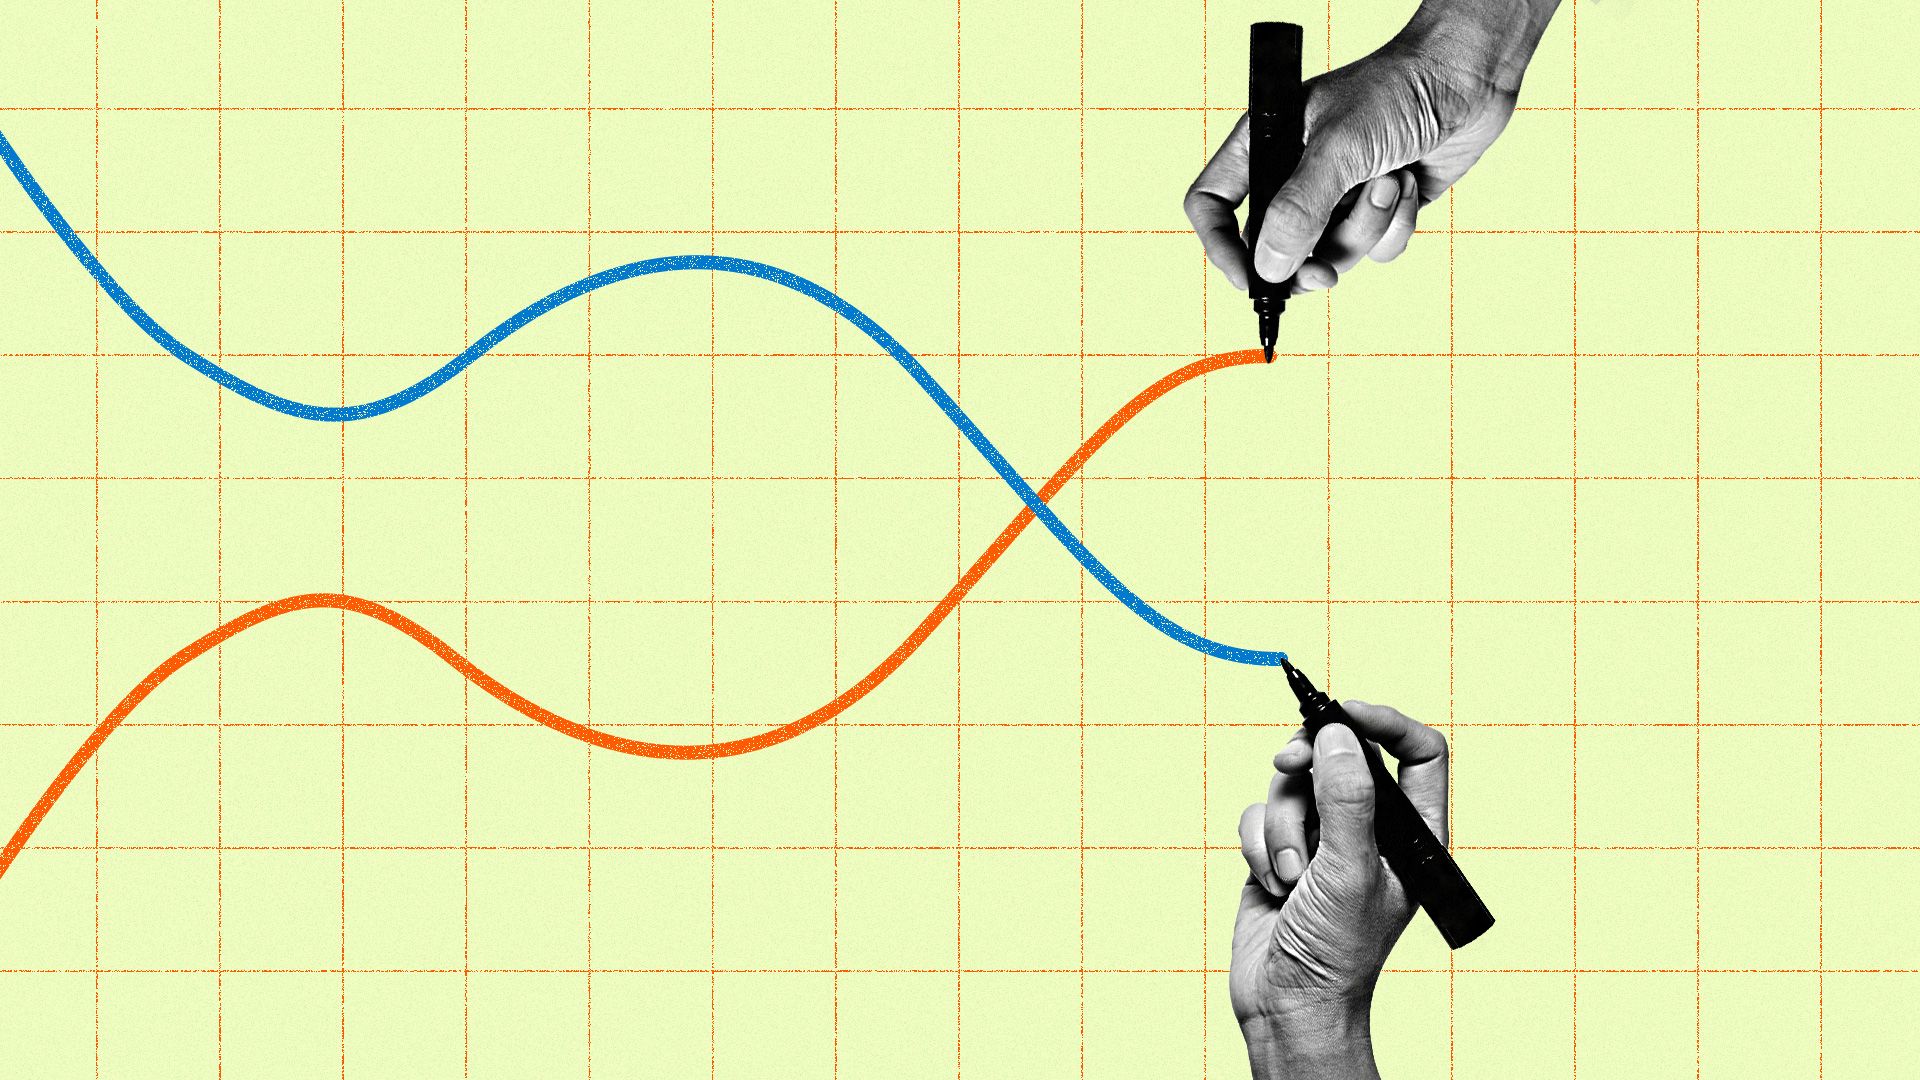 In this illustration, two hands draw parallel yield curves that rise and fall in opposite directions.